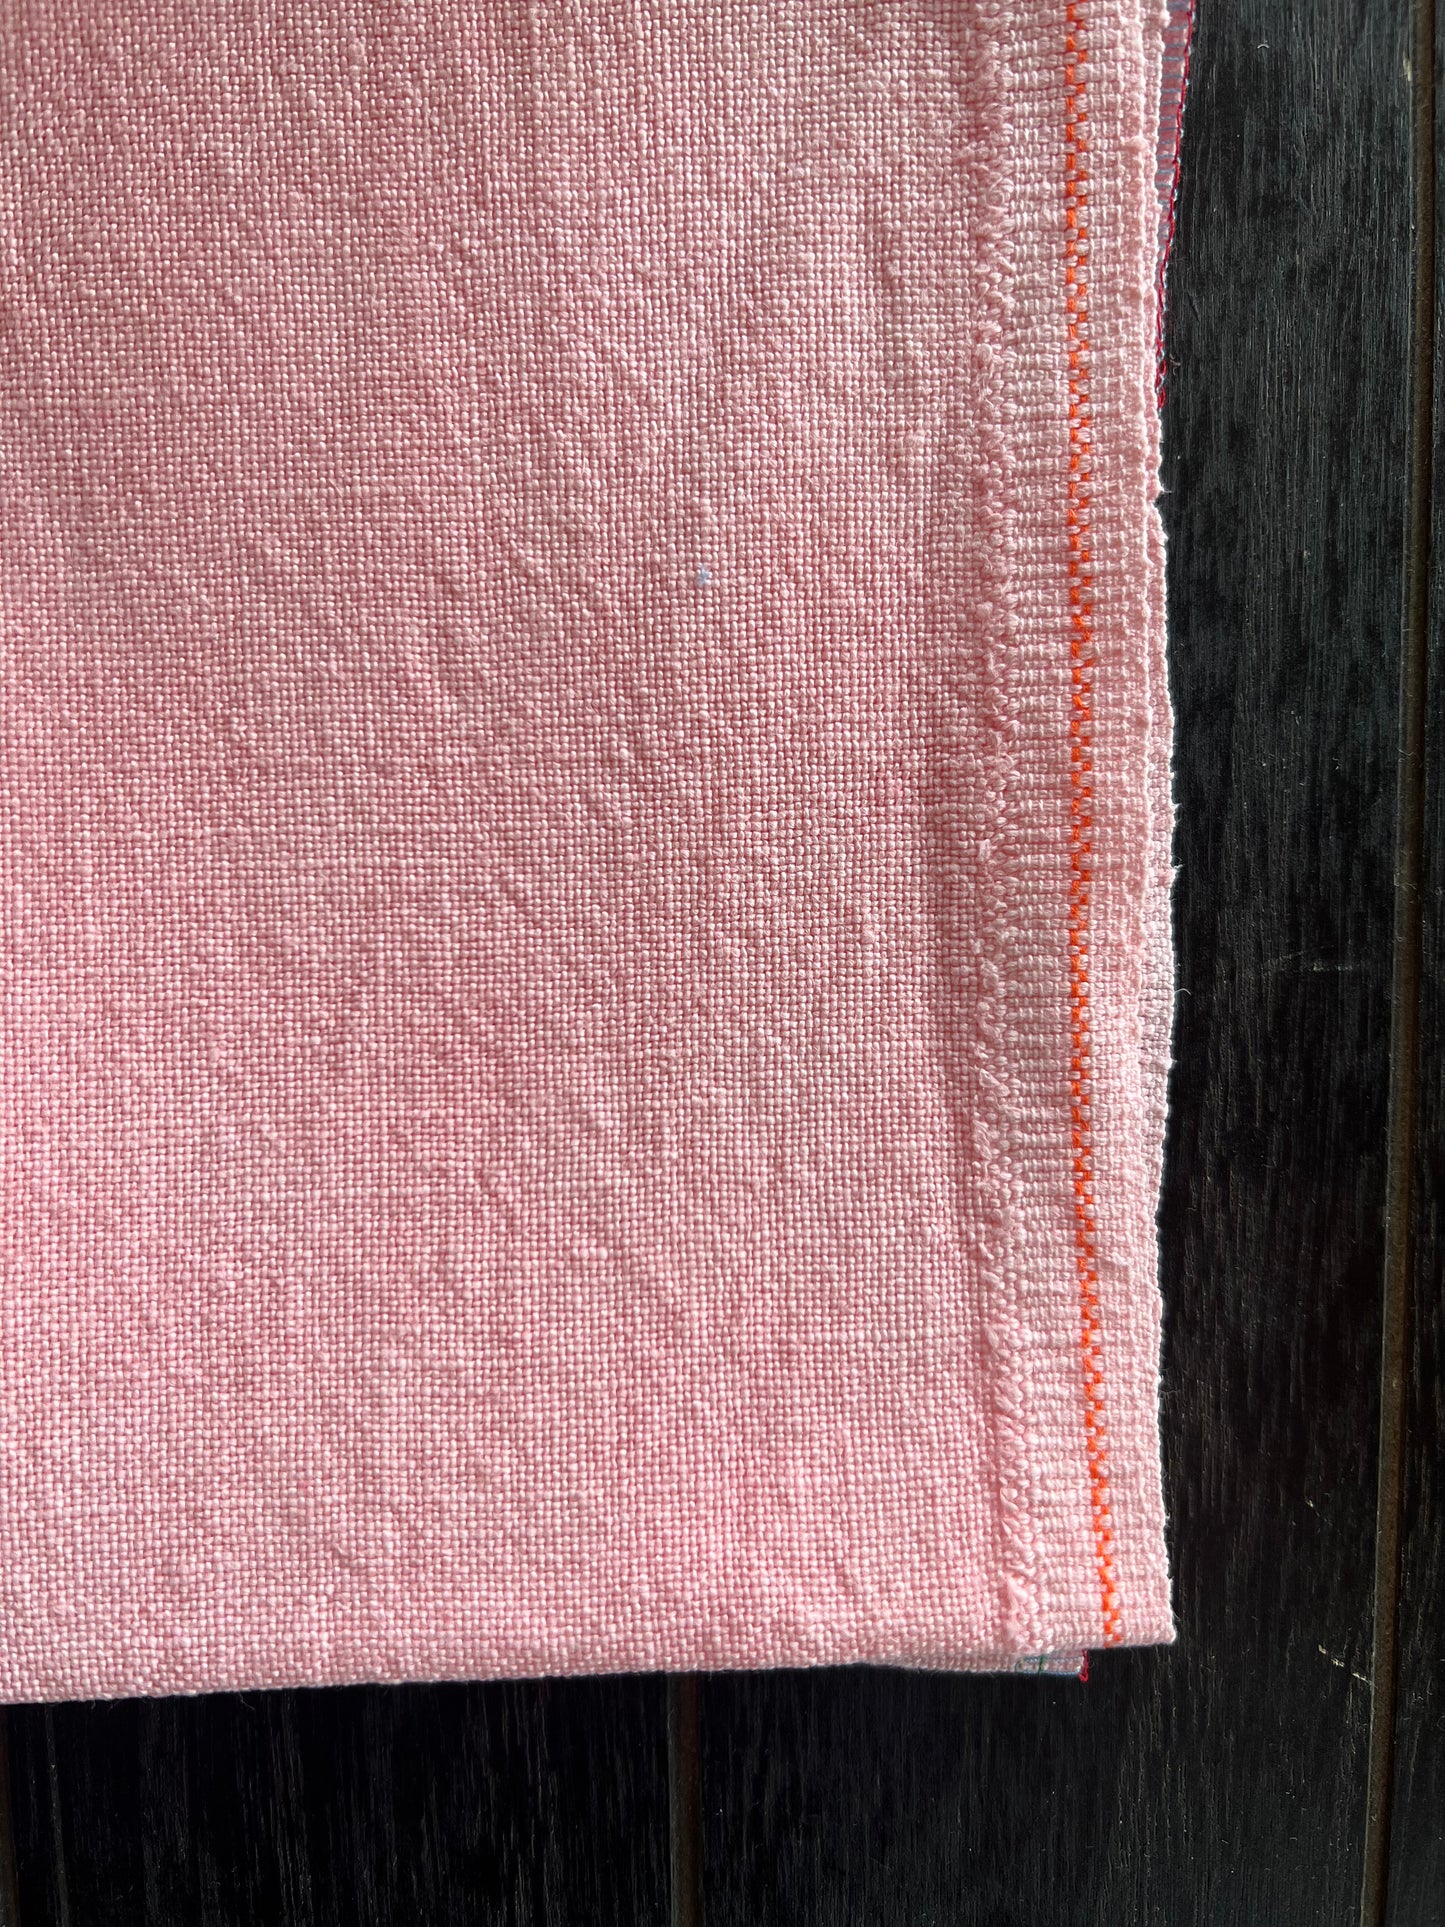 32 Count Linen 'Pink Lupin' Hand Dyed Cross Stitch Fabric